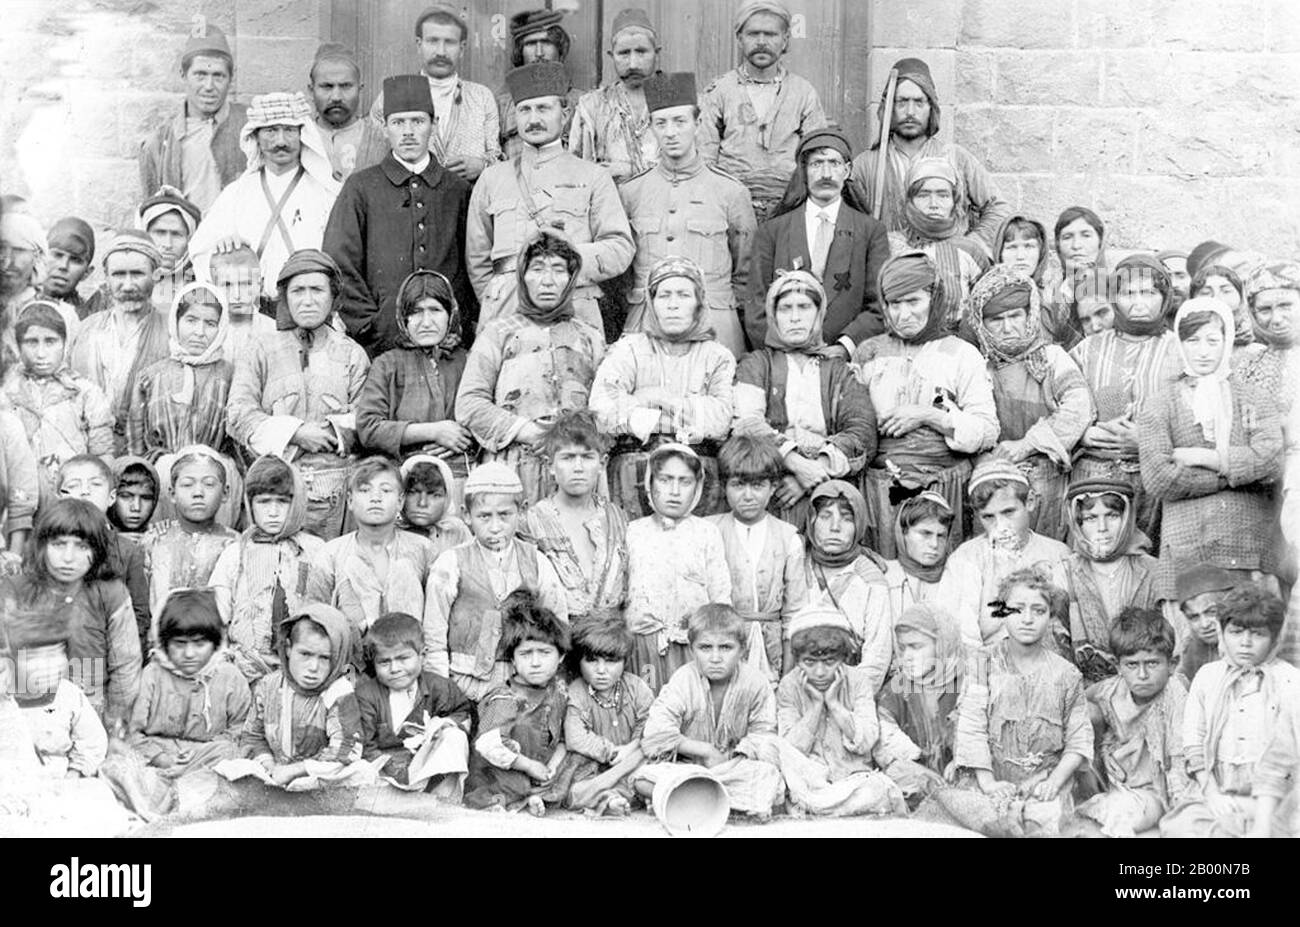 Armenia: Armenian Genocide, Women and children rescued in Der’a in spring 1918.  The Armenian Genocide refers to the deliberate and systematic destruction of the Armenian population of the Ottoman Empire during and just after World War I. It was implemented through wholesale massacres and deportations, with the deportations consisting of forced marches under conditions designed to lead to the death of the deportees. The total number of resulting Armenian deaths is generally held to have been between one and one and a half million. Stock Photo